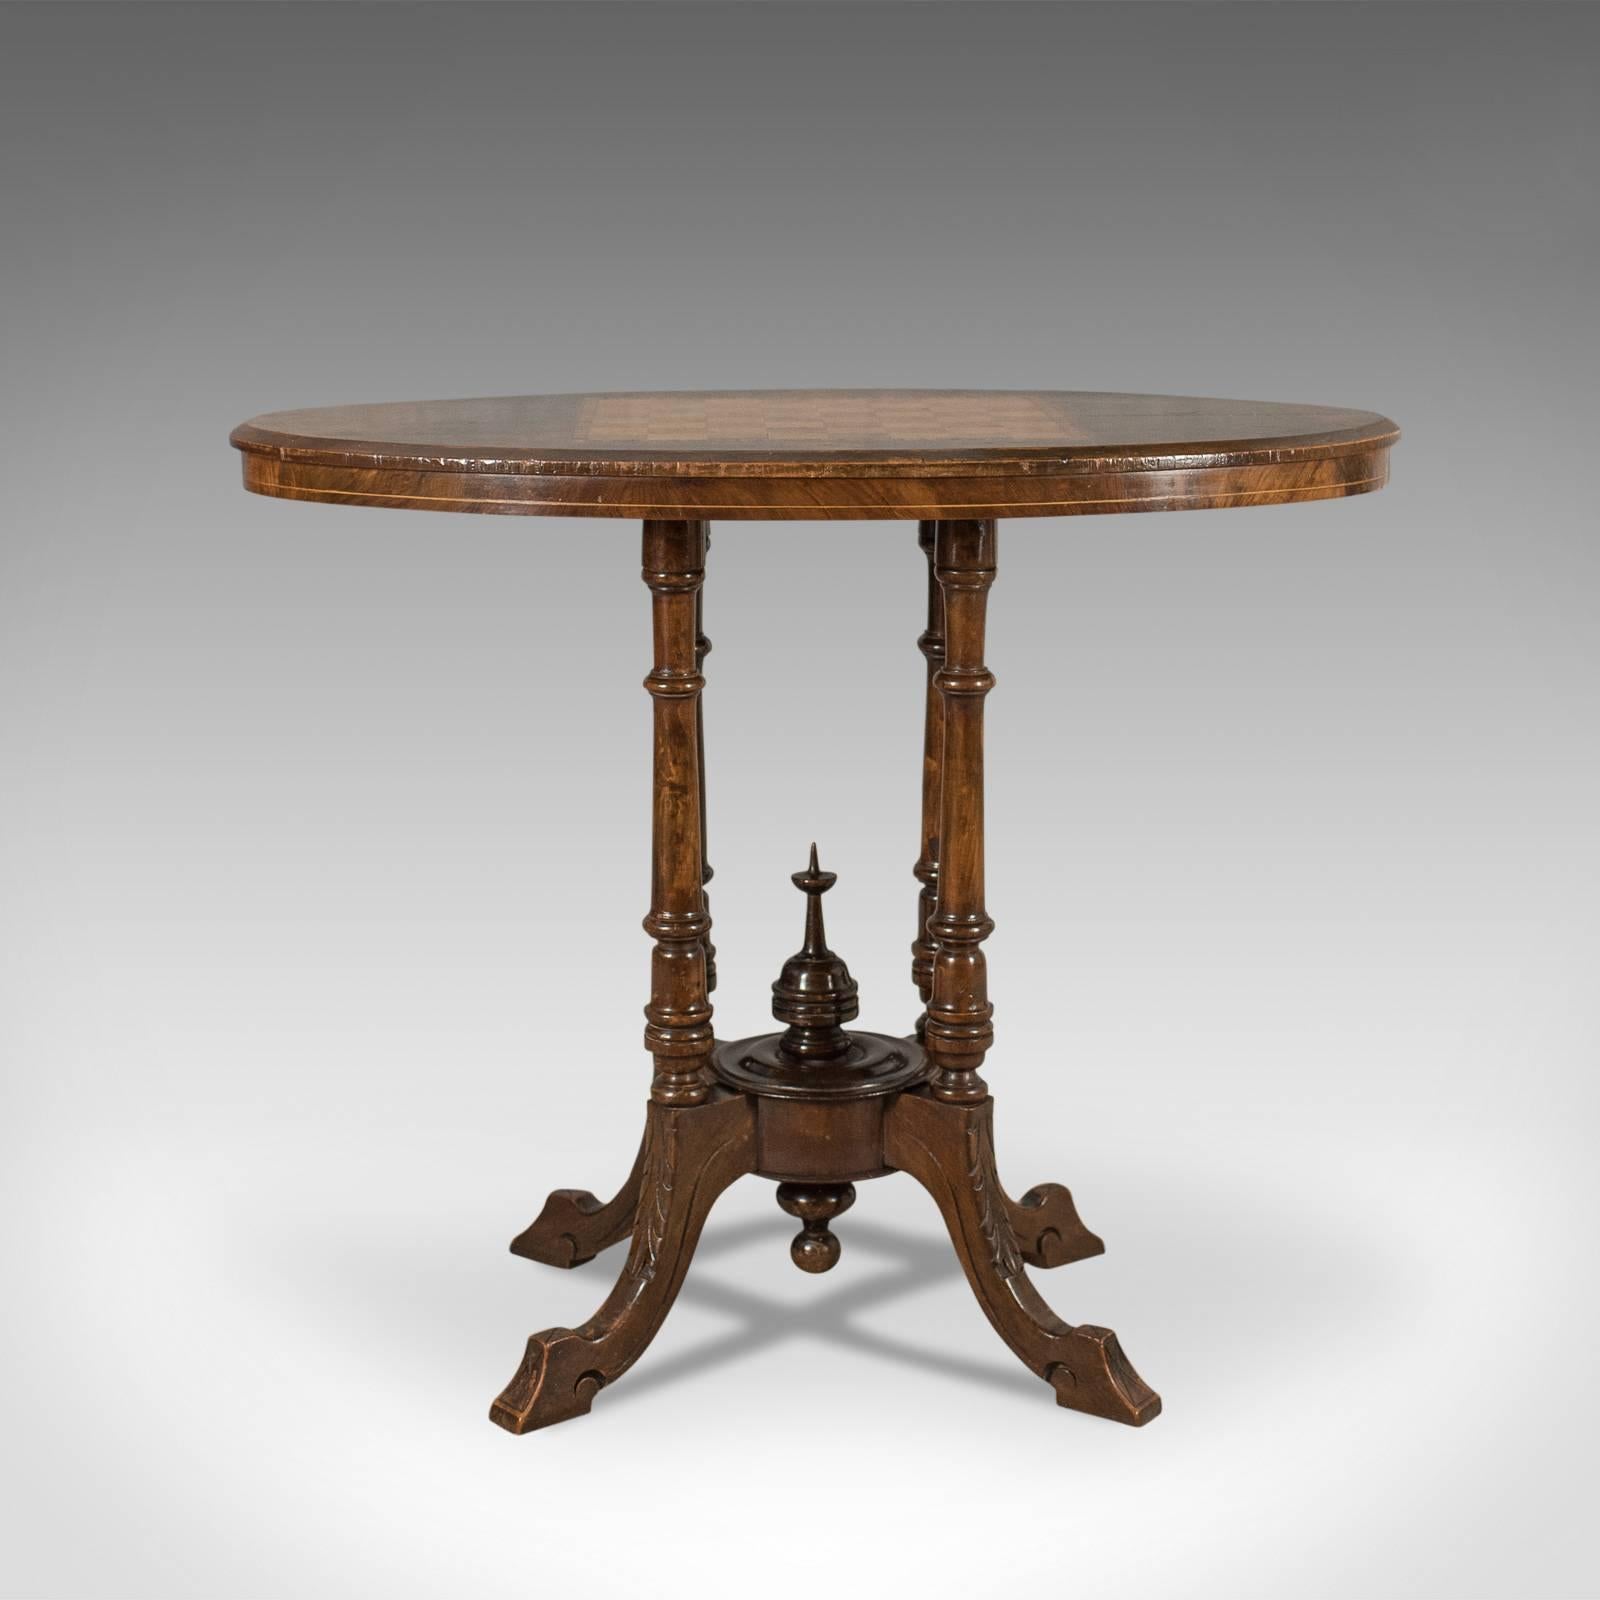 This is a delightful Victorian antique side table with inlaid chess board, an English piece dating to circa 1880.

English walnut displaying desirable swirly grain in a polished finish
Good color in the butterscotch hues beneath a wax polished